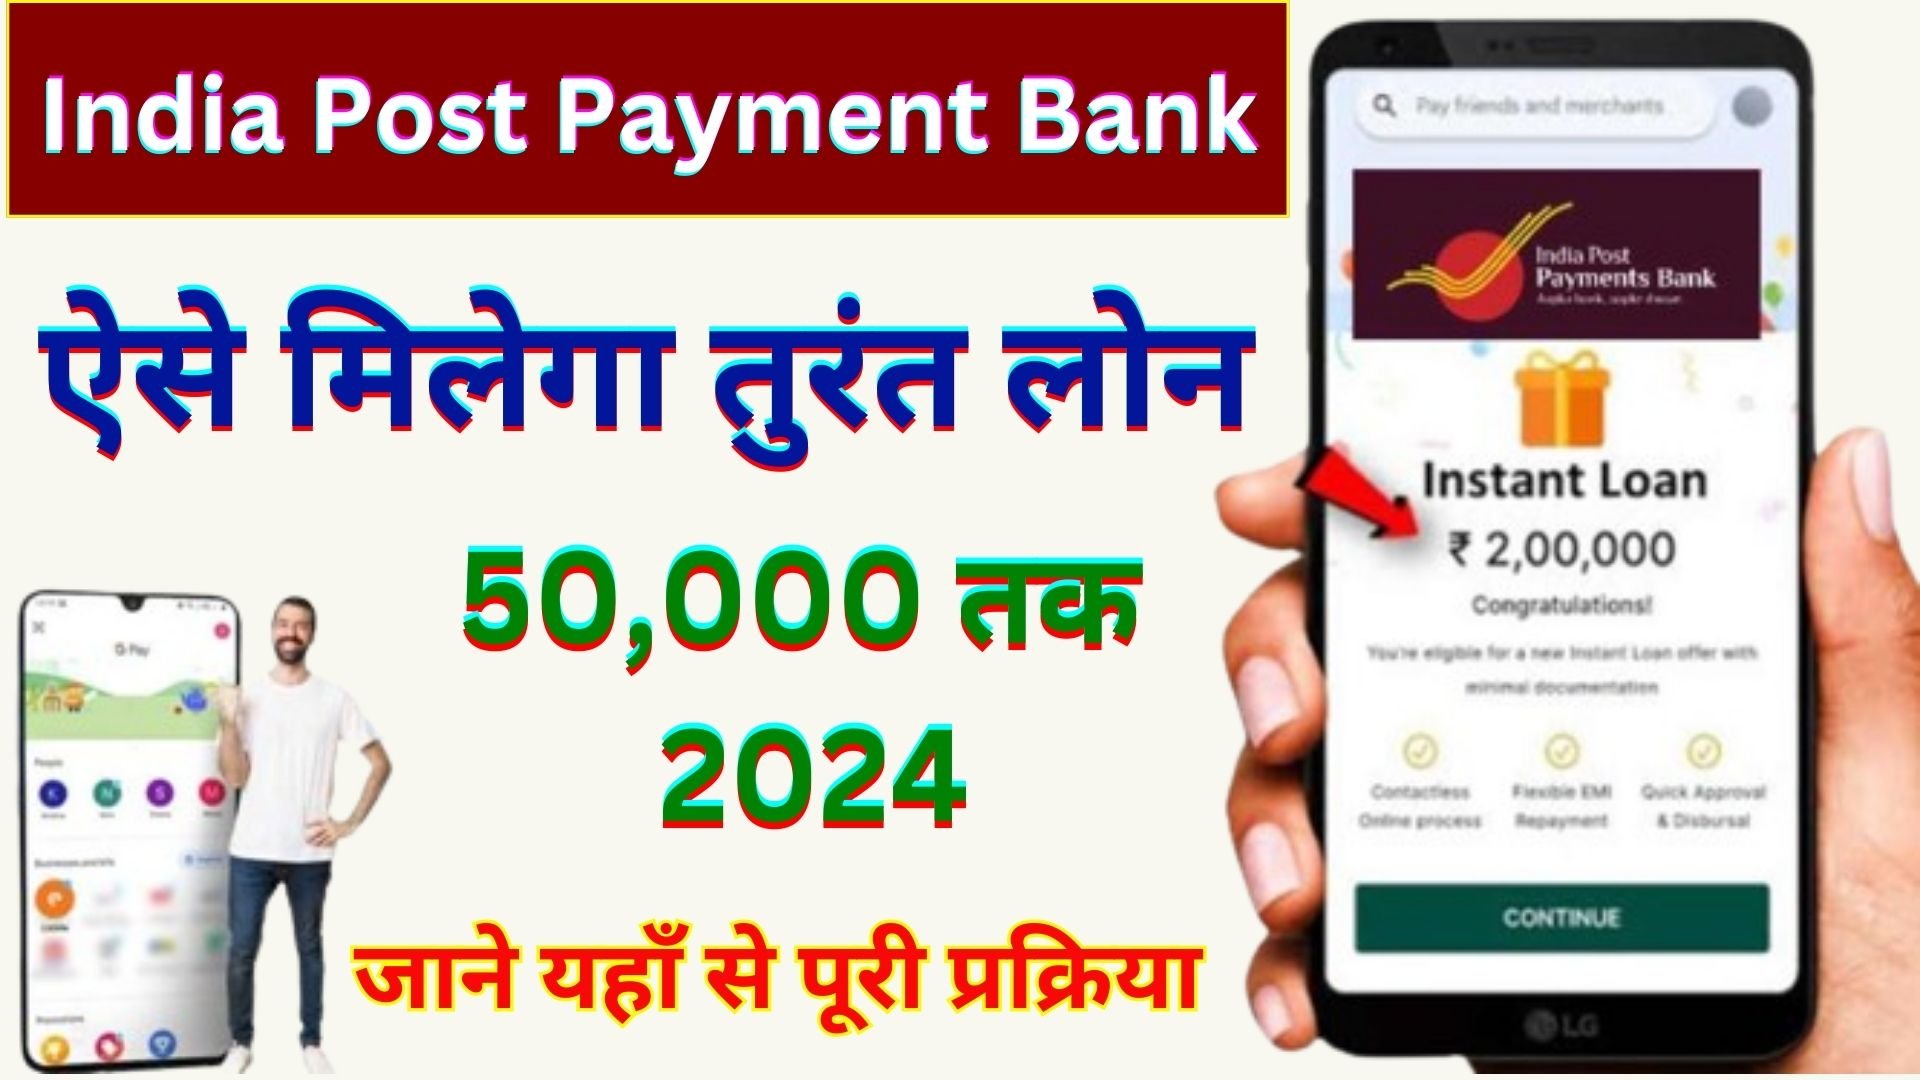 India post payment bank personal loan 2023: IPPB Personal Loan 2023 | Instant Loan 2023